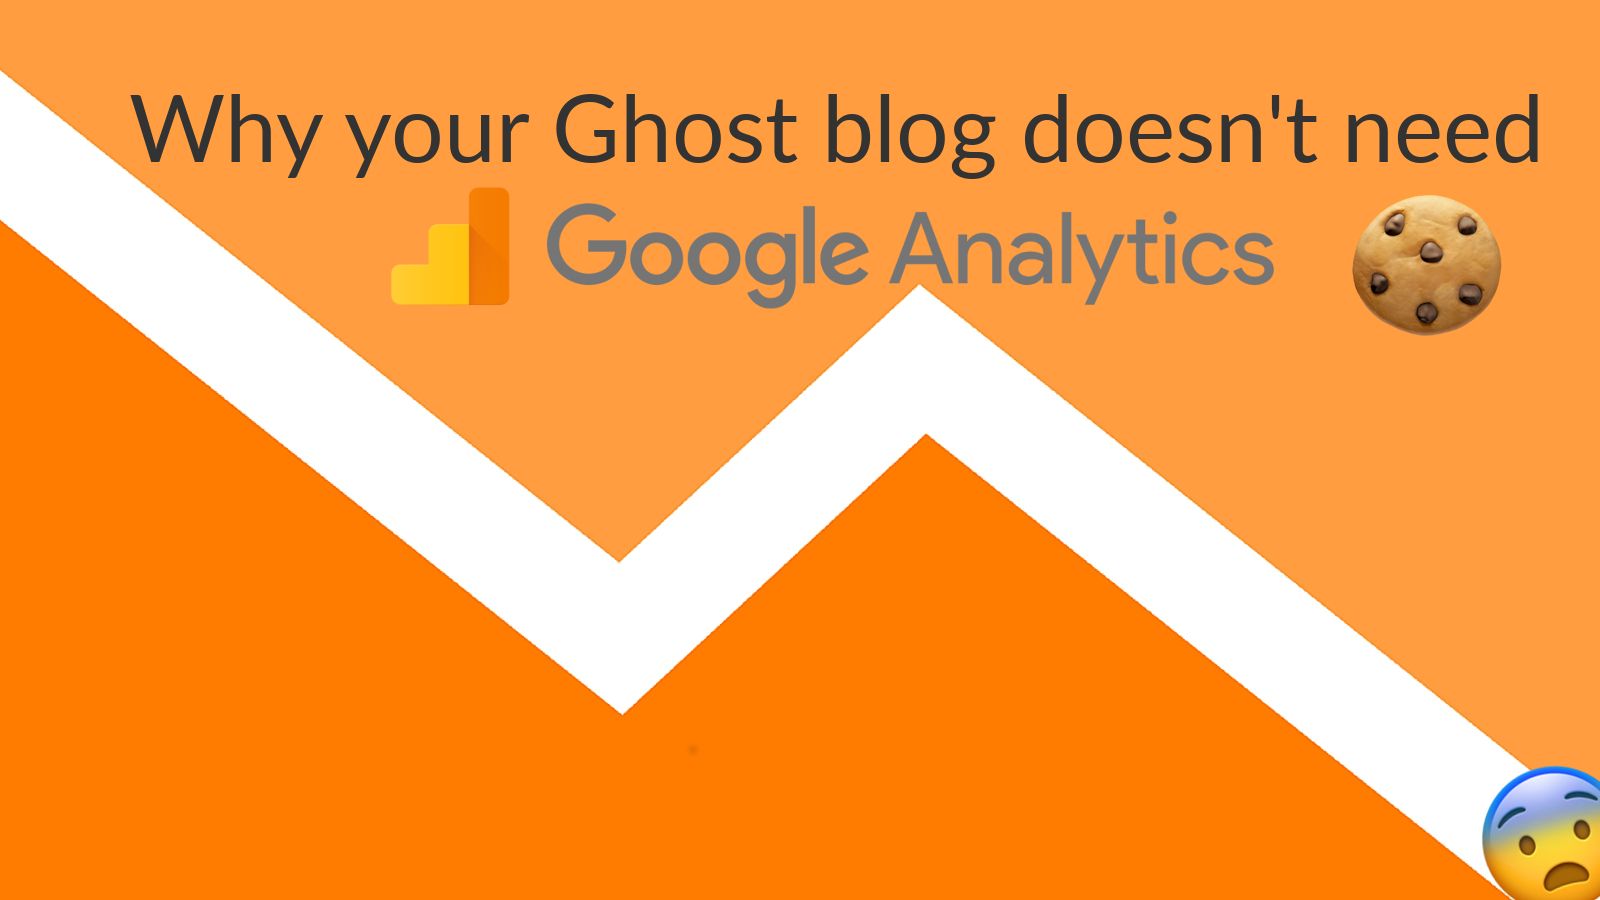 Why your Ghost blog doesn't need Google Analytics